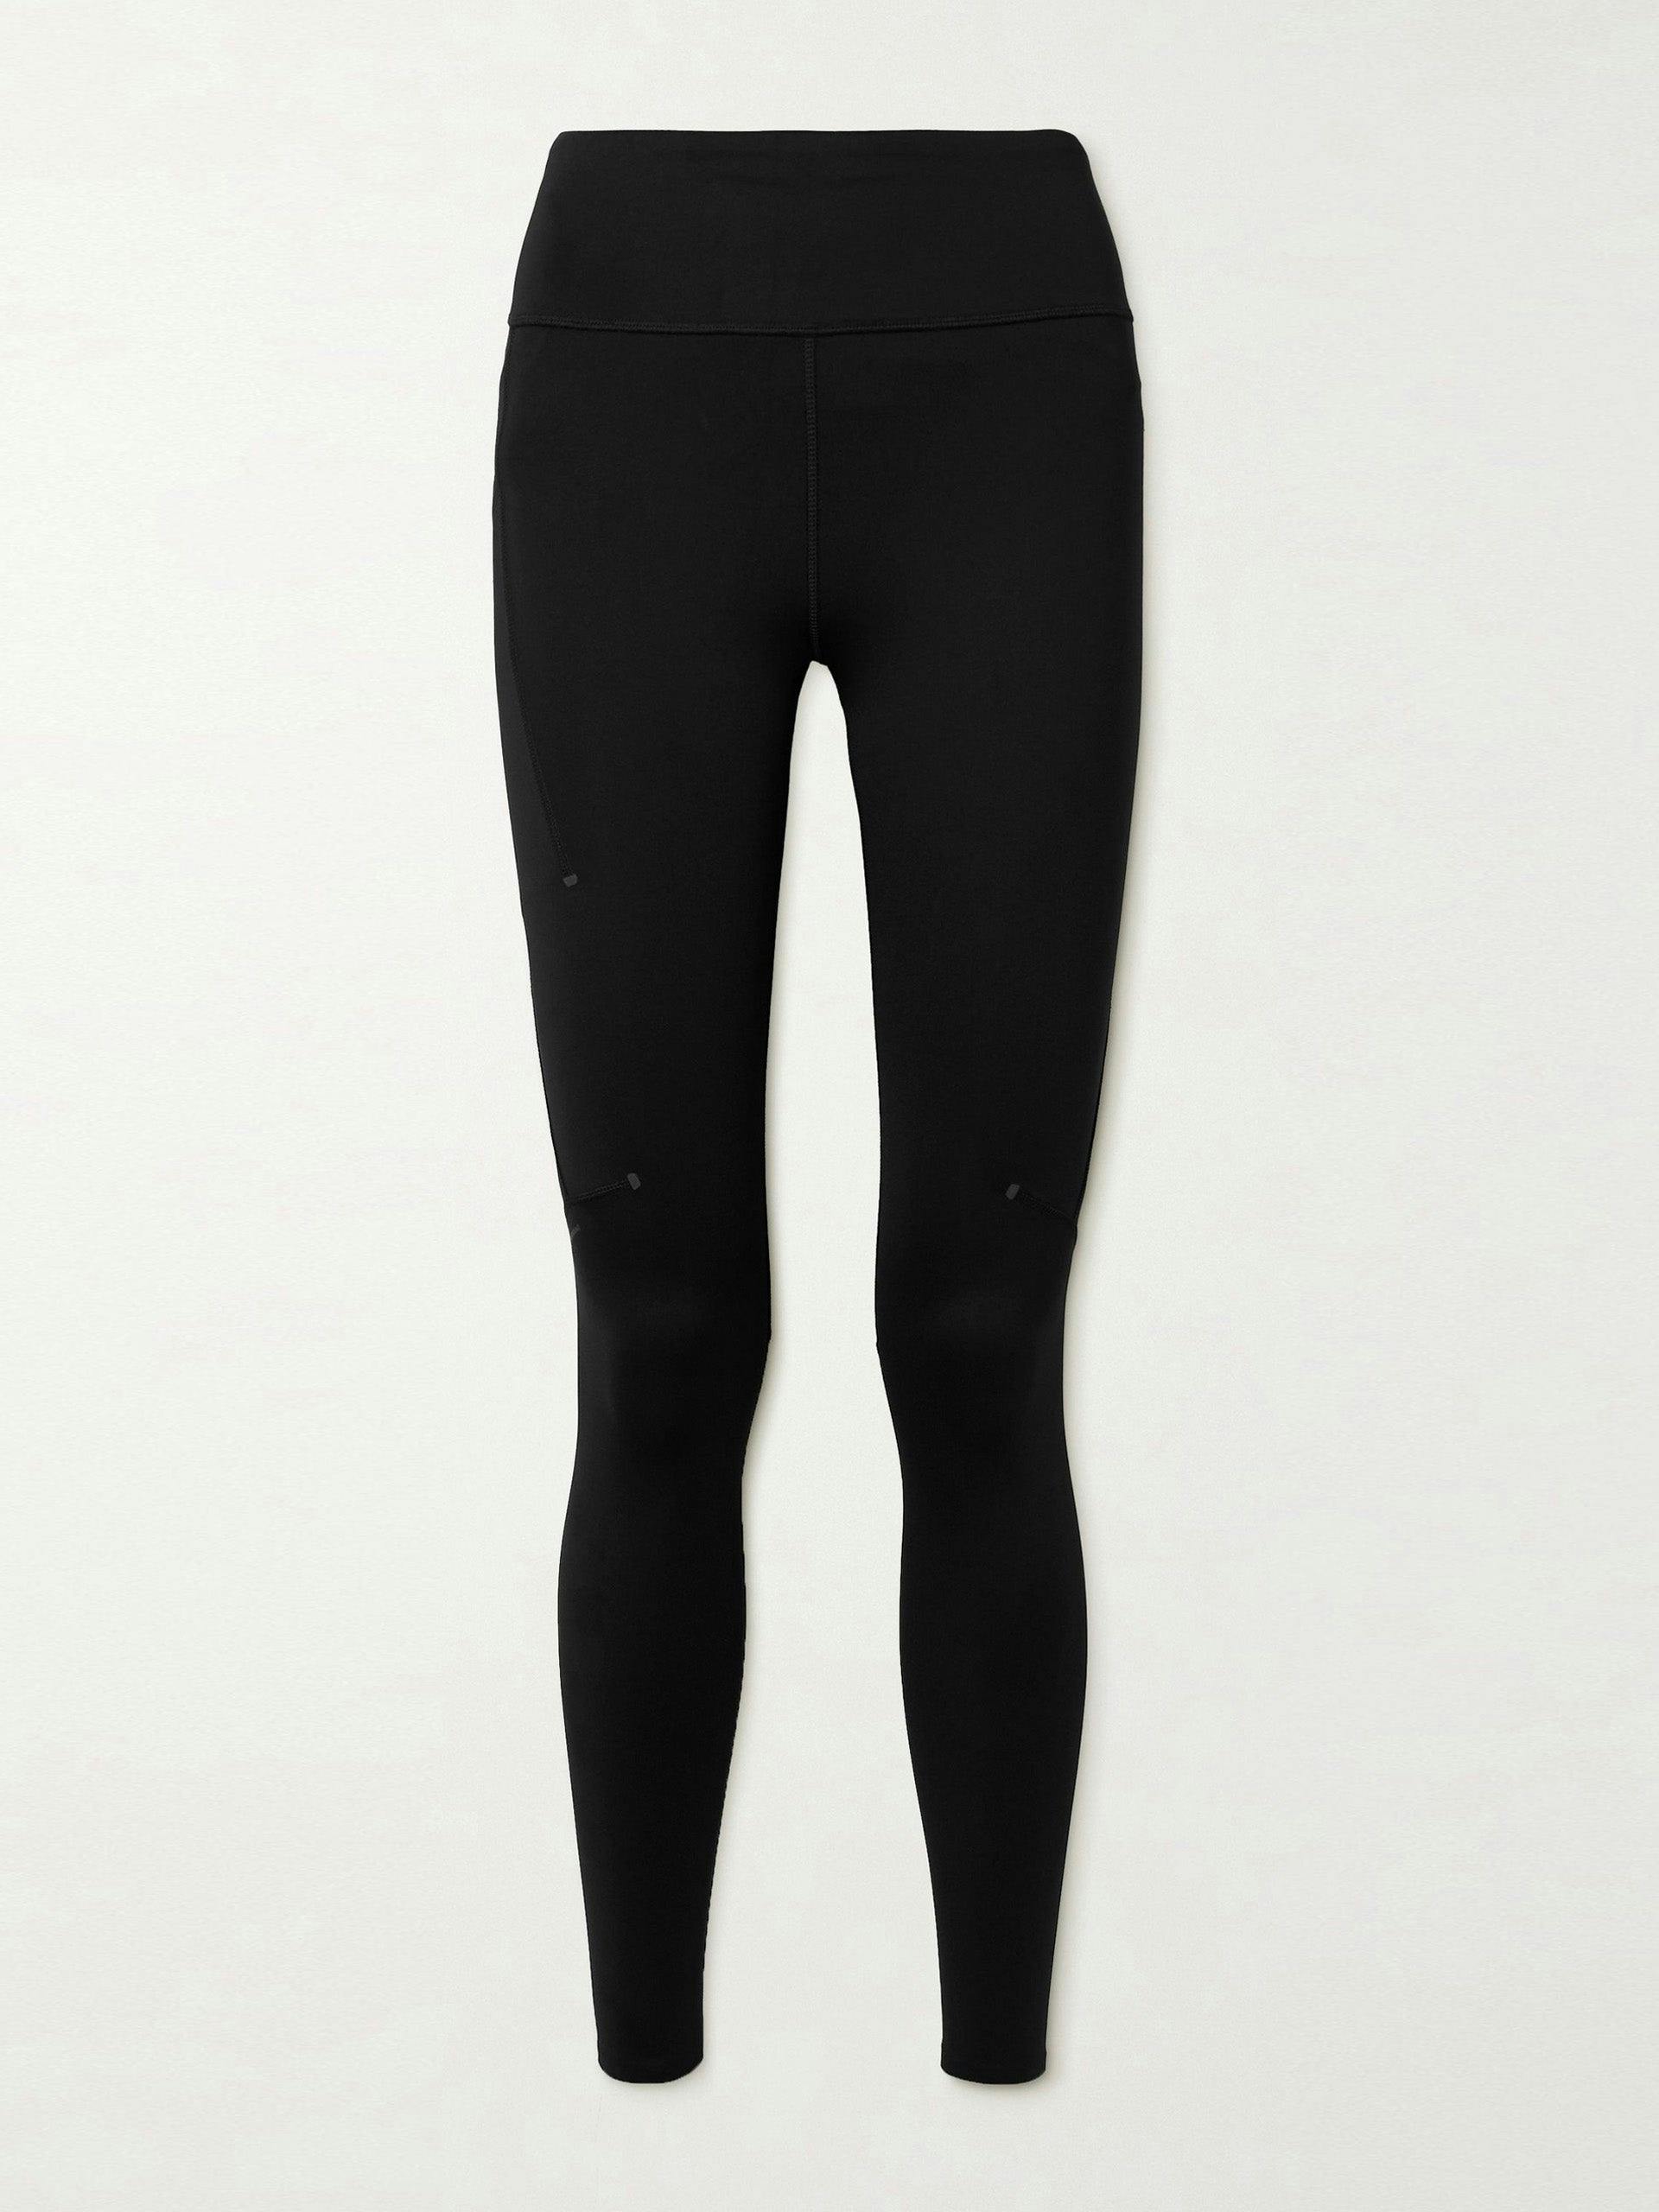 Performance stretch recycled leggings